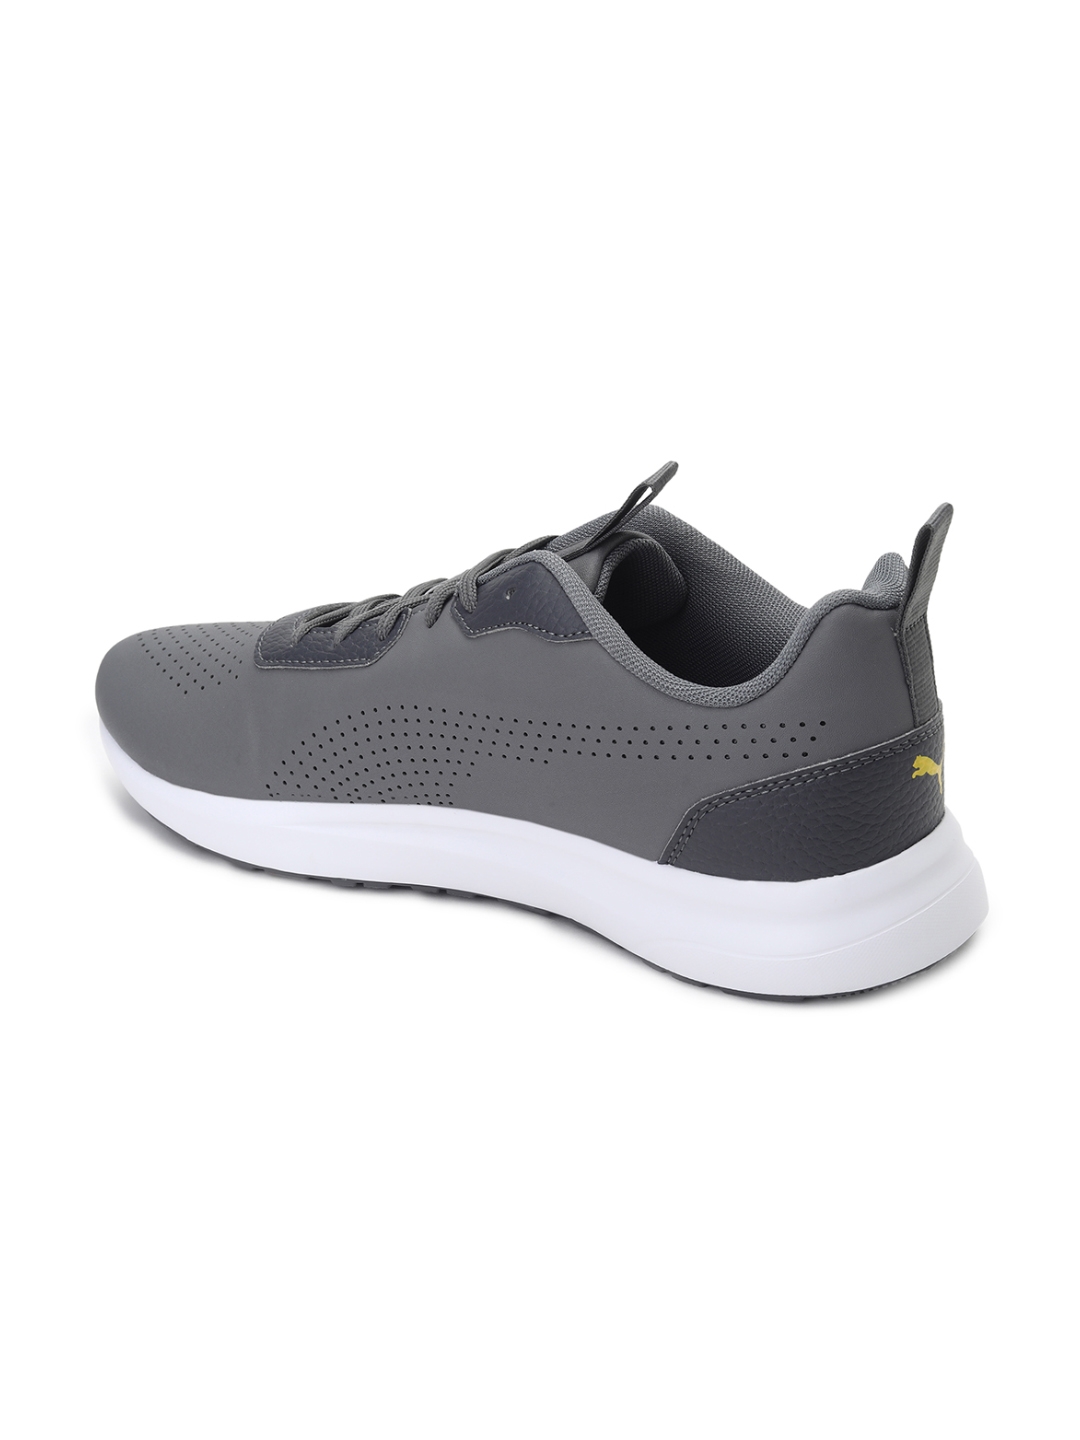 Puma | Perforated Low Unisex Sneakers 1